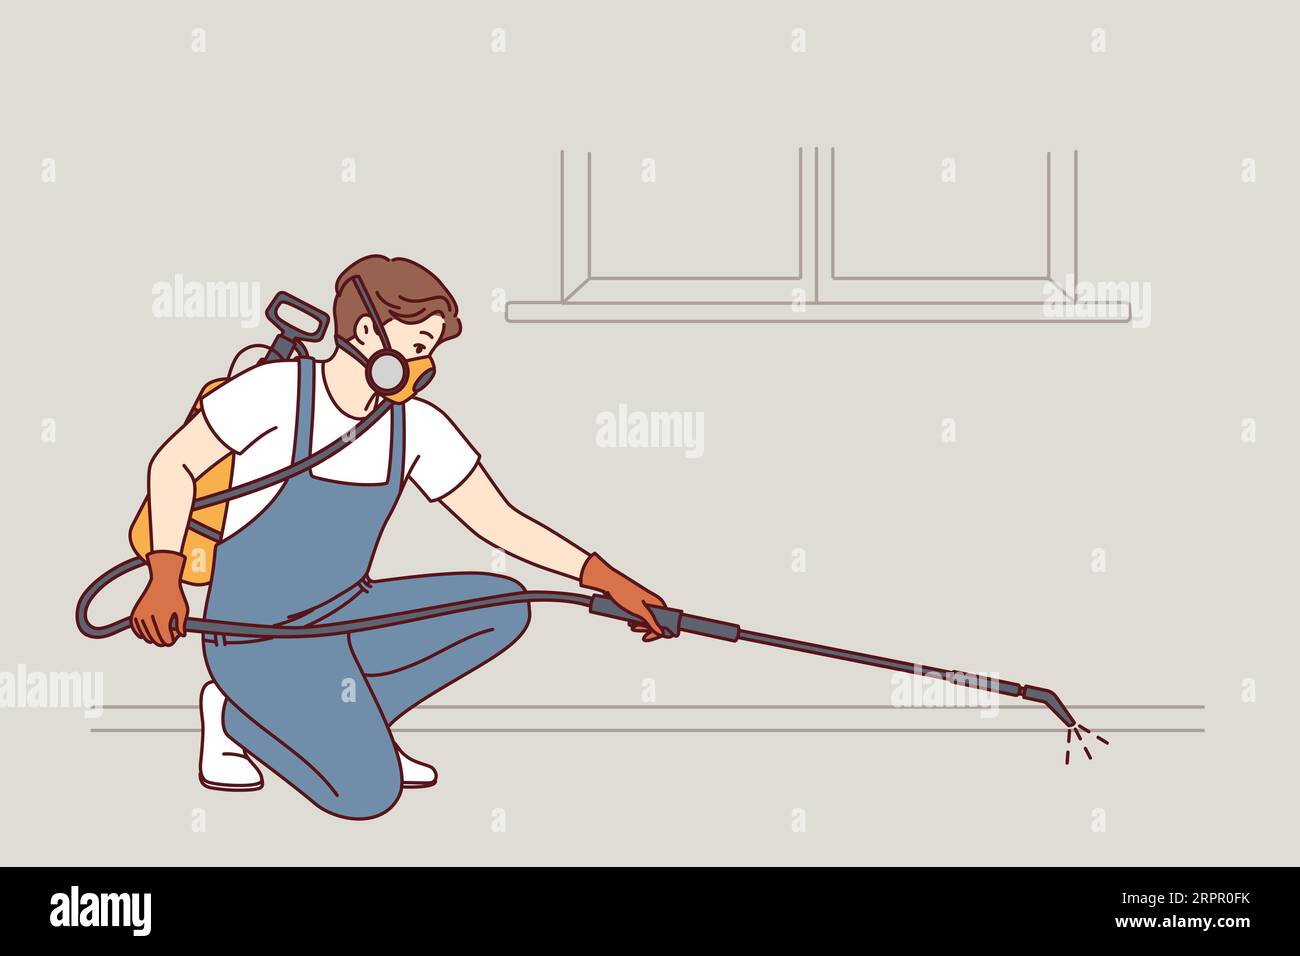 Man doing pest control using disinfection equipment and spraying liquid to kill insects. Employee of cleaning company in respirator makes disinfection of premises to get rid of rats and rodents. Stock Vector